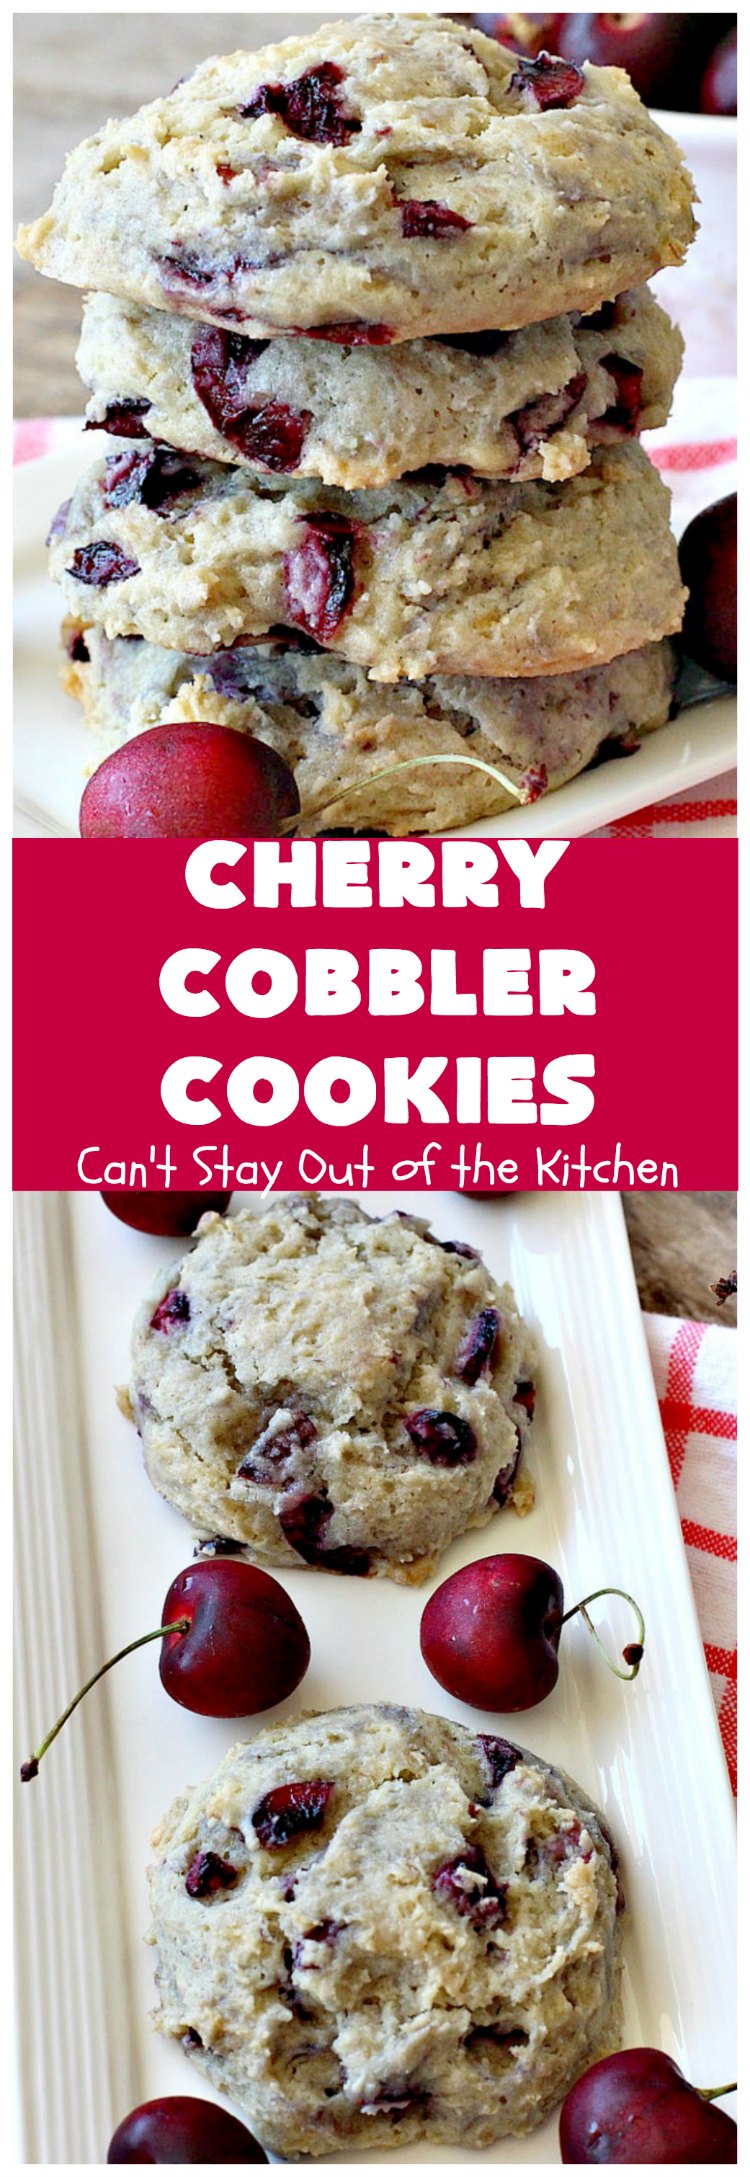 Cherry Cobbler Cookies | Can't Stay Out of the Kitchen